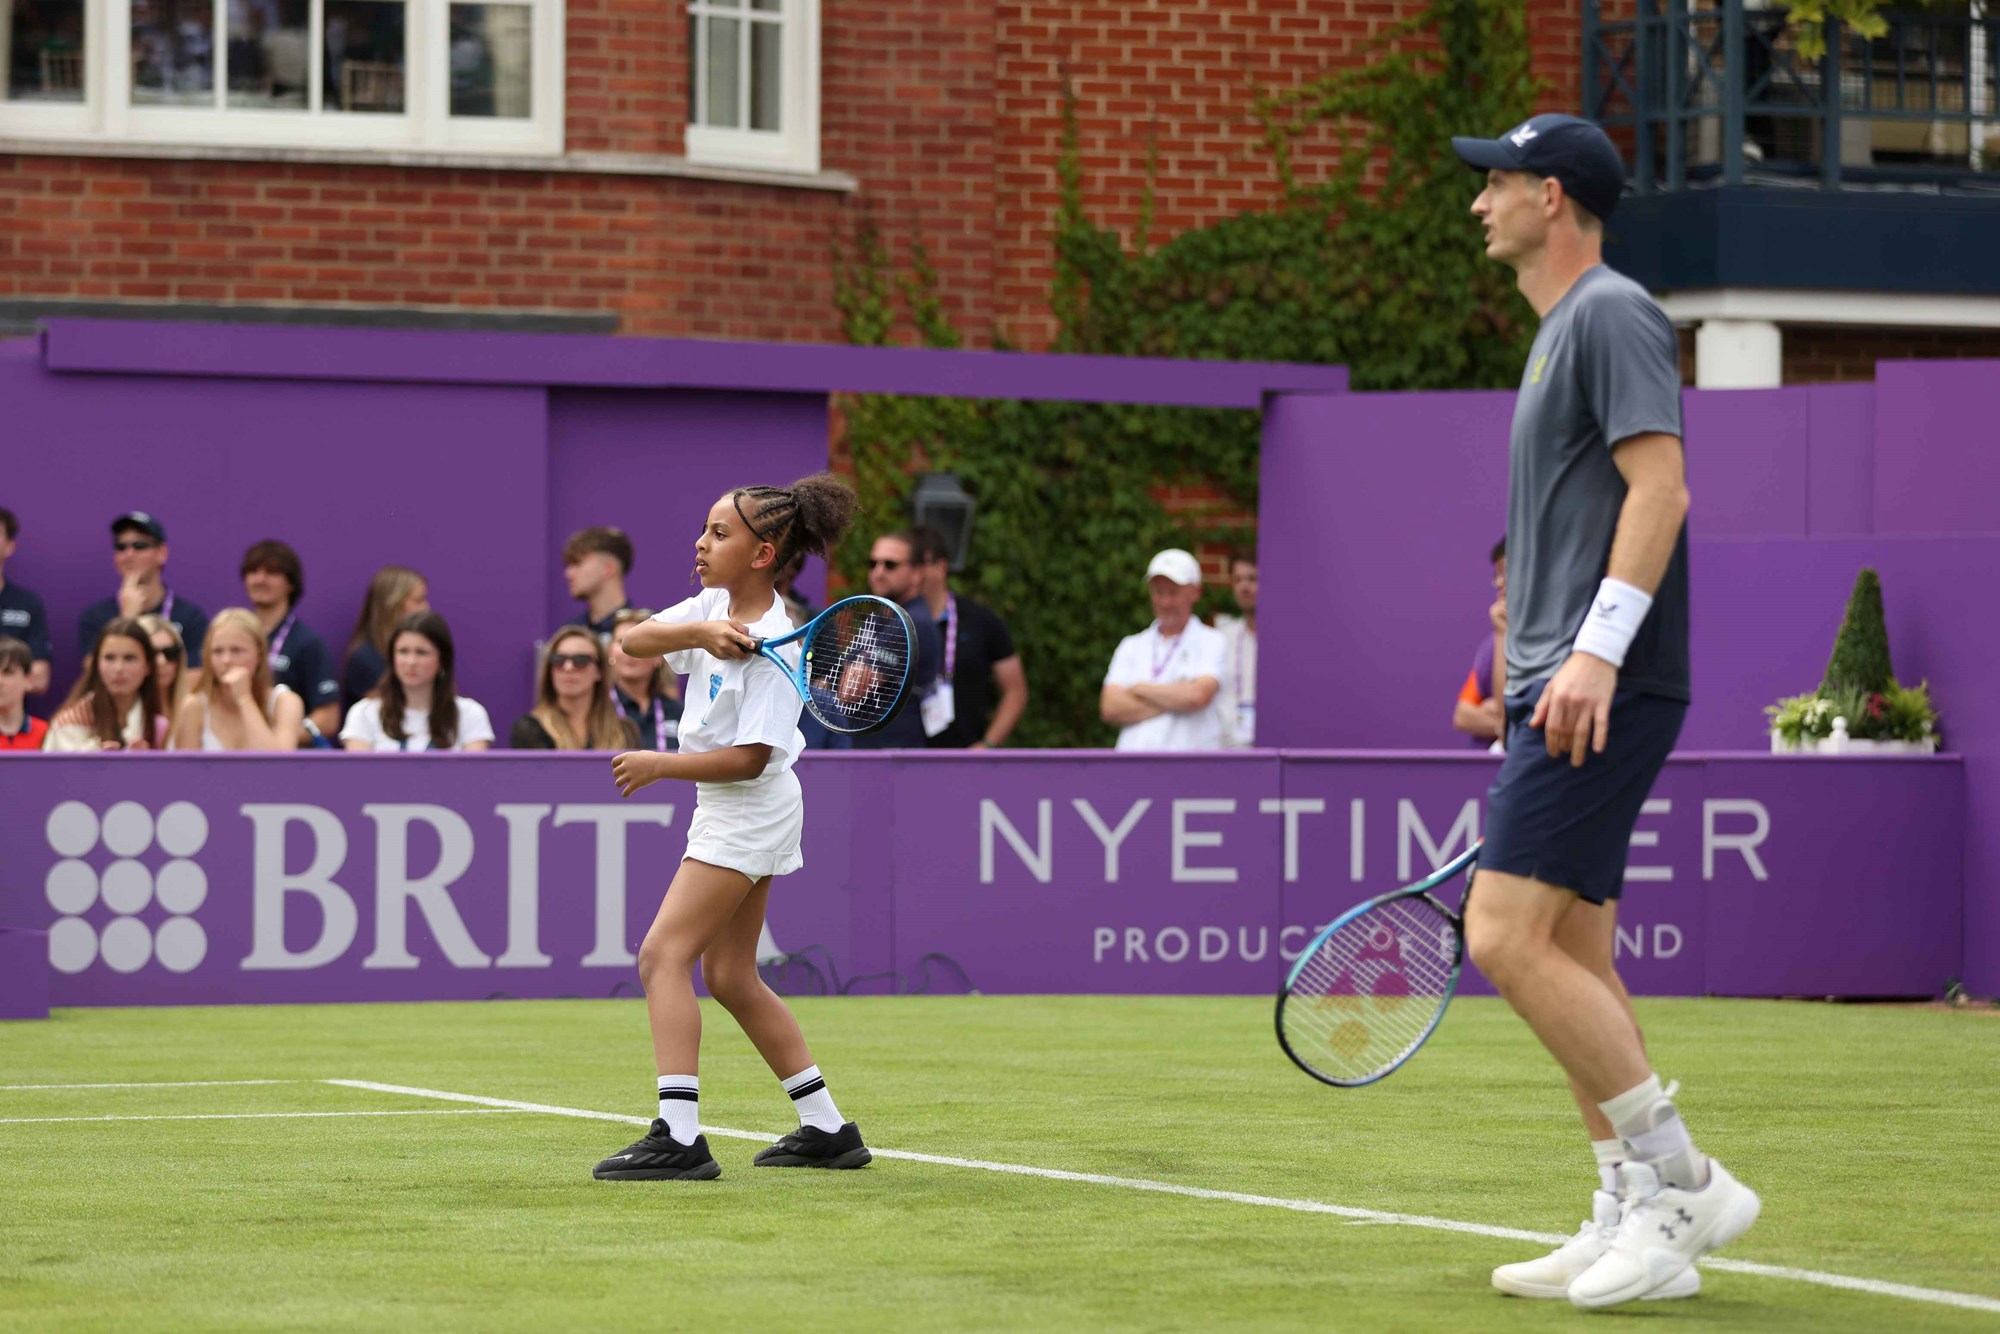 Andy Murray watching a young girl stood next to him on a tennis court at the cinch Championships